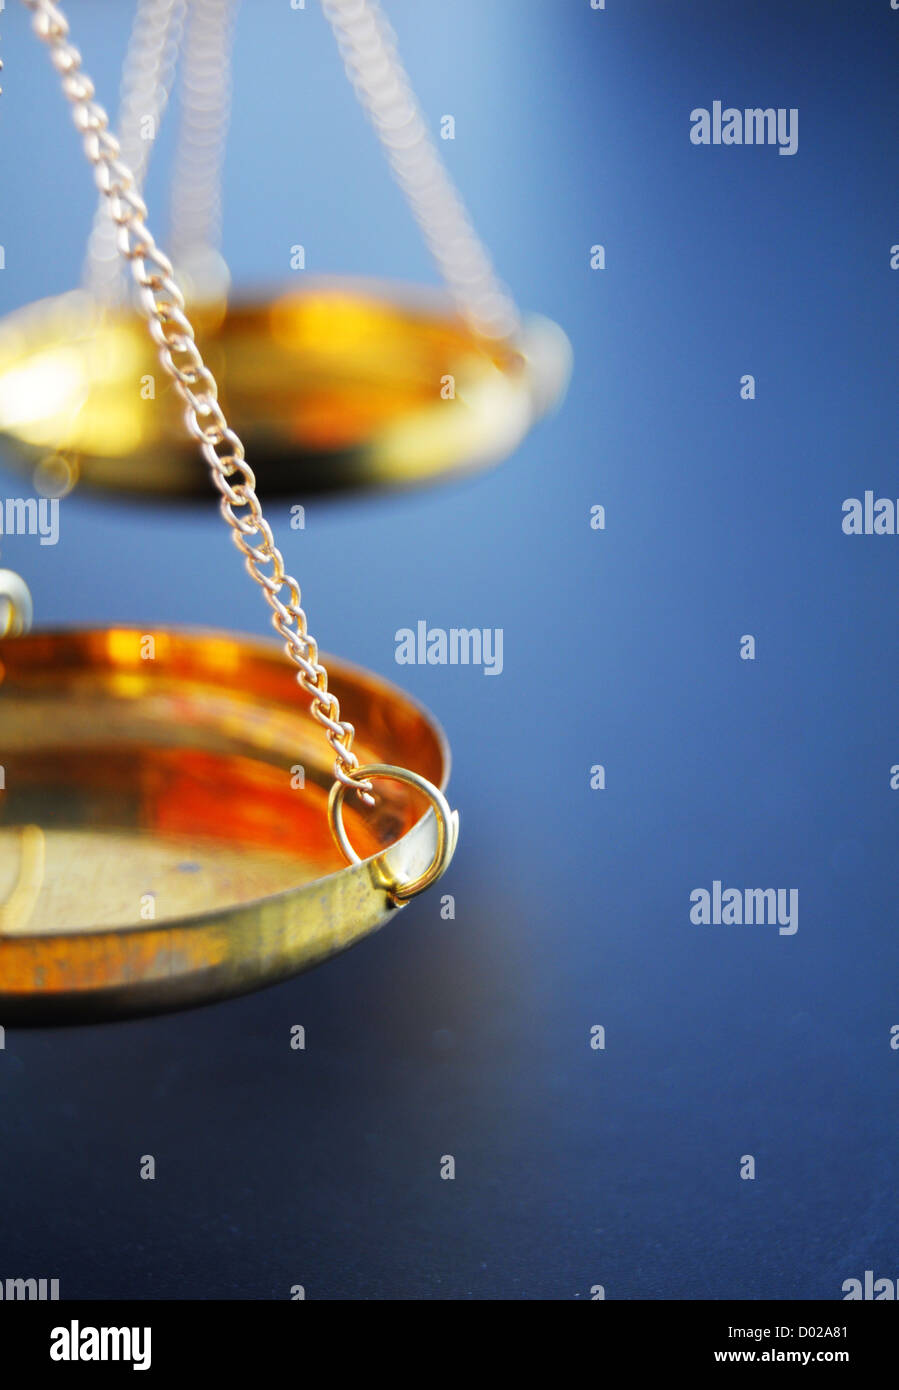 sclaes with copyspace showing law justice or court concept Stock Photo